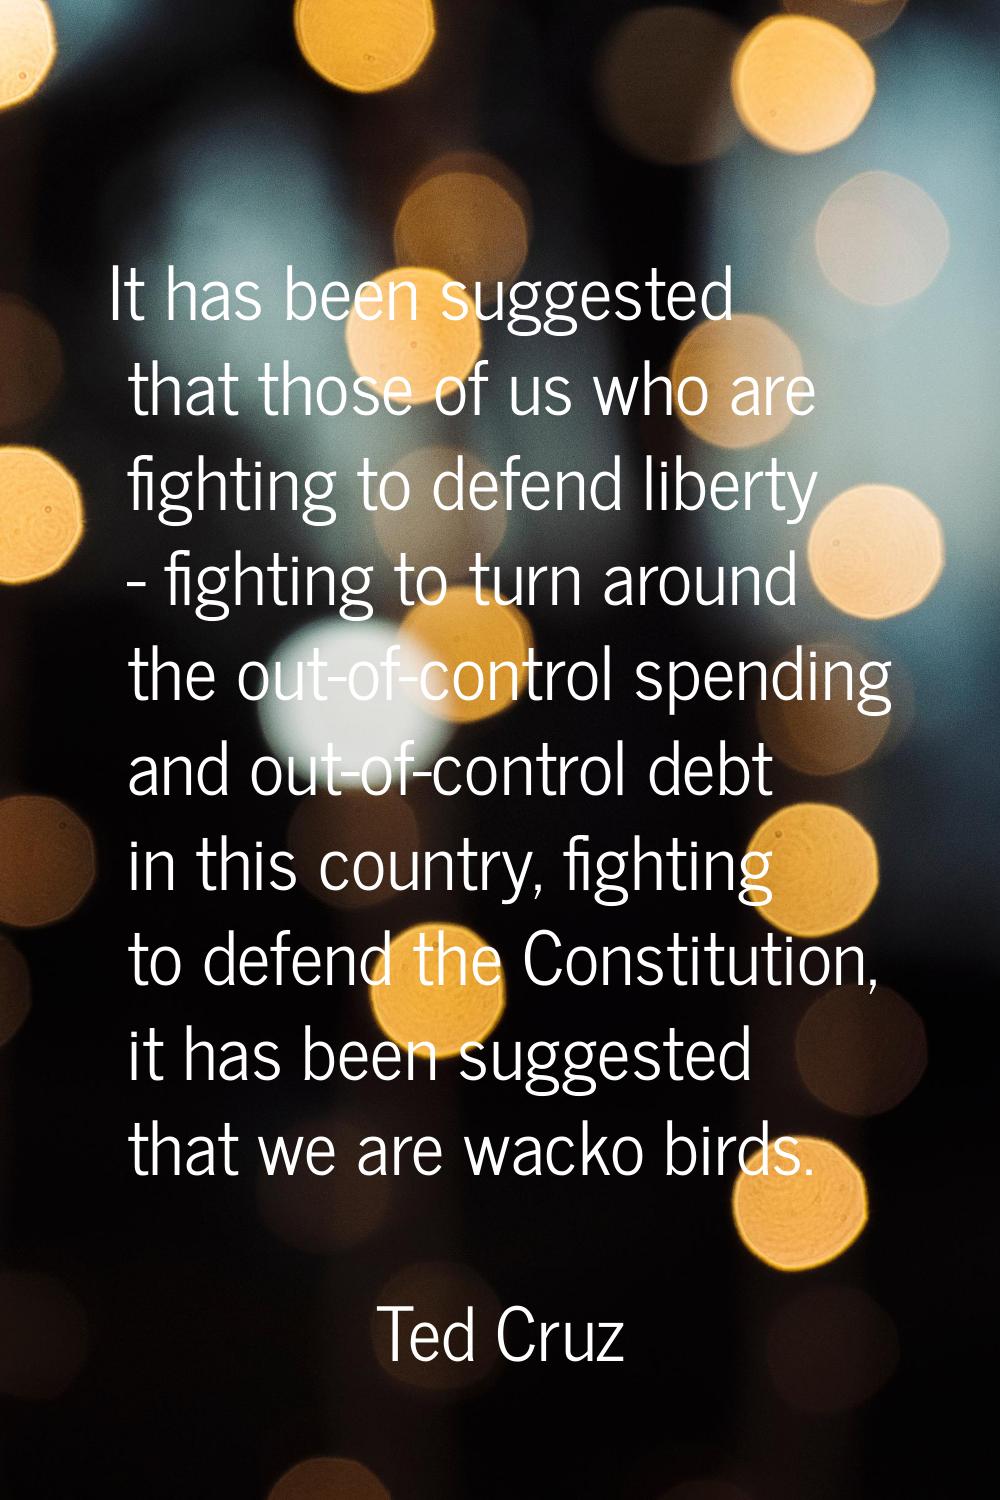 It has been suggested that those of us who are fighting to defend liberty - fighting to turn around